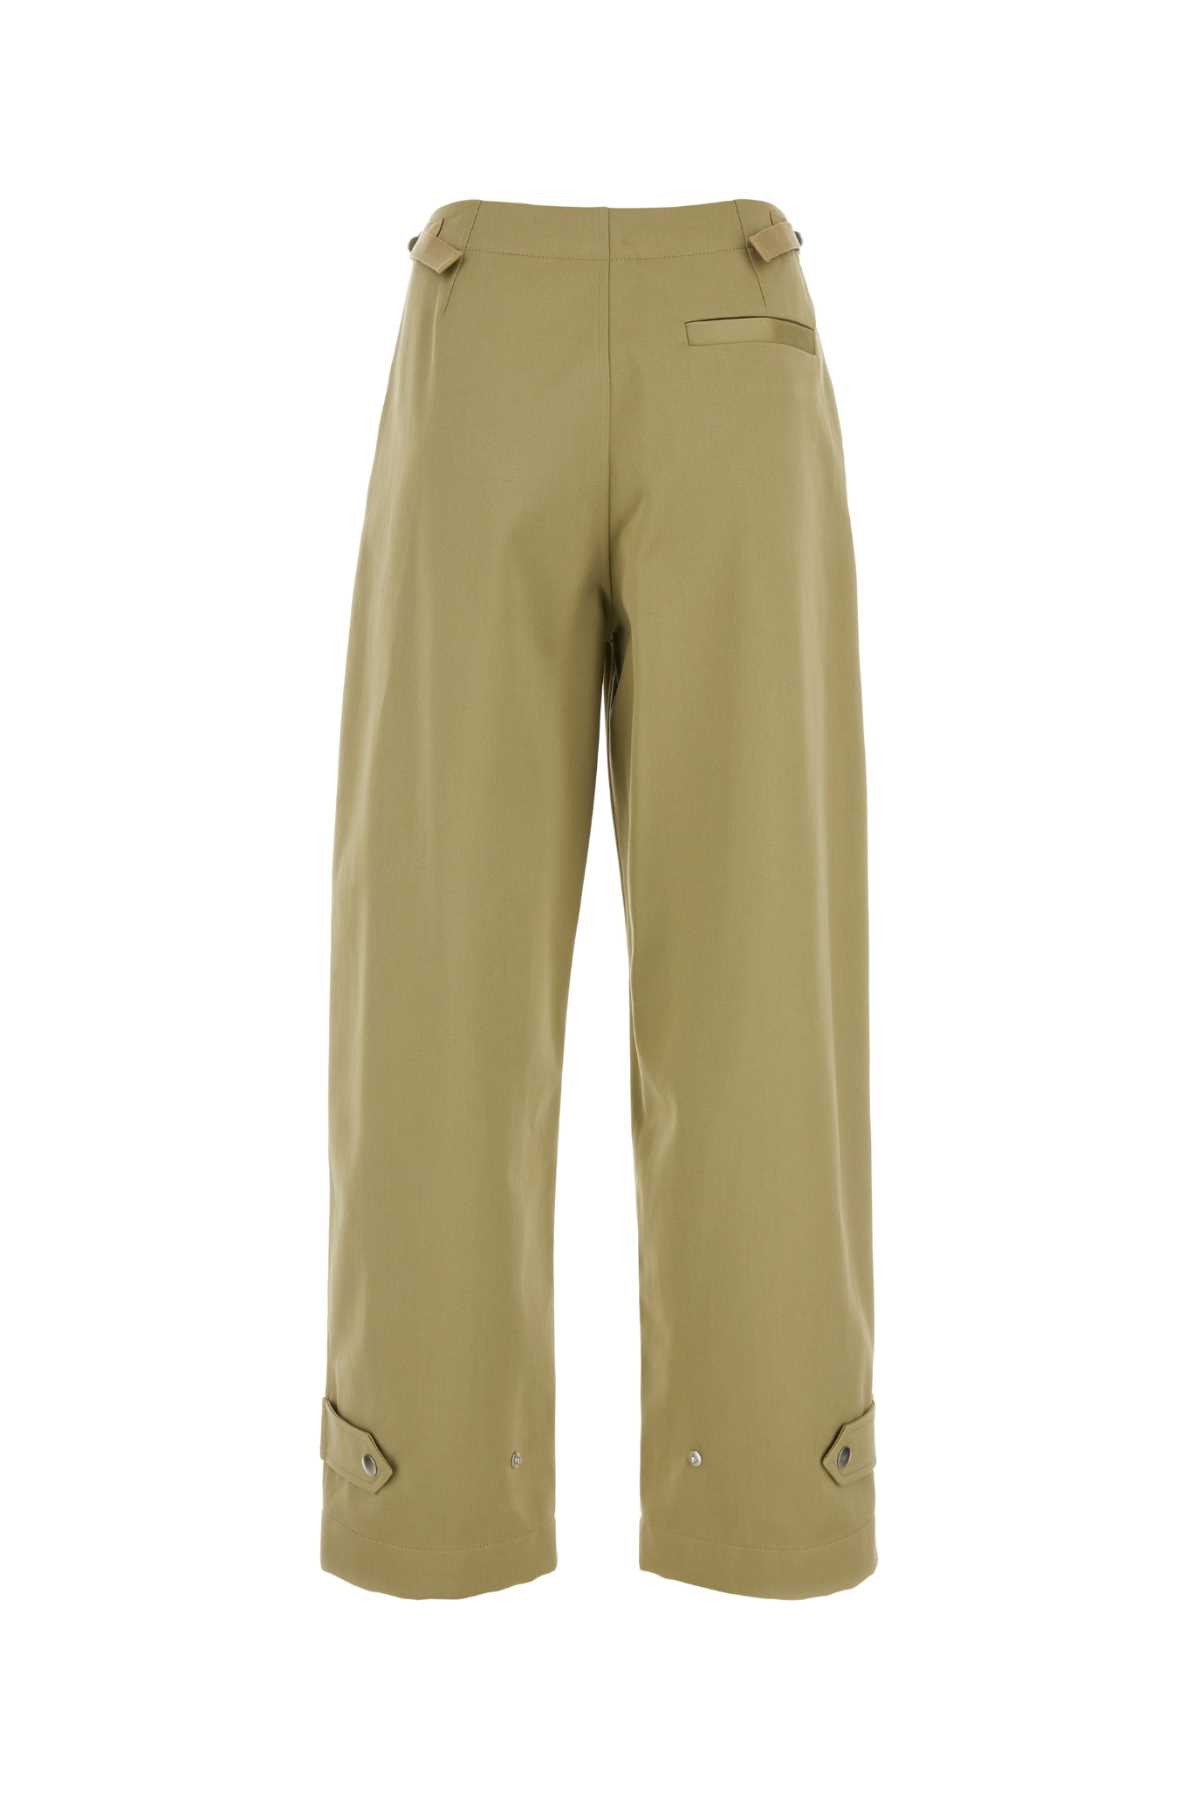 Burberry Military Green Cotton Trouser In Hunter